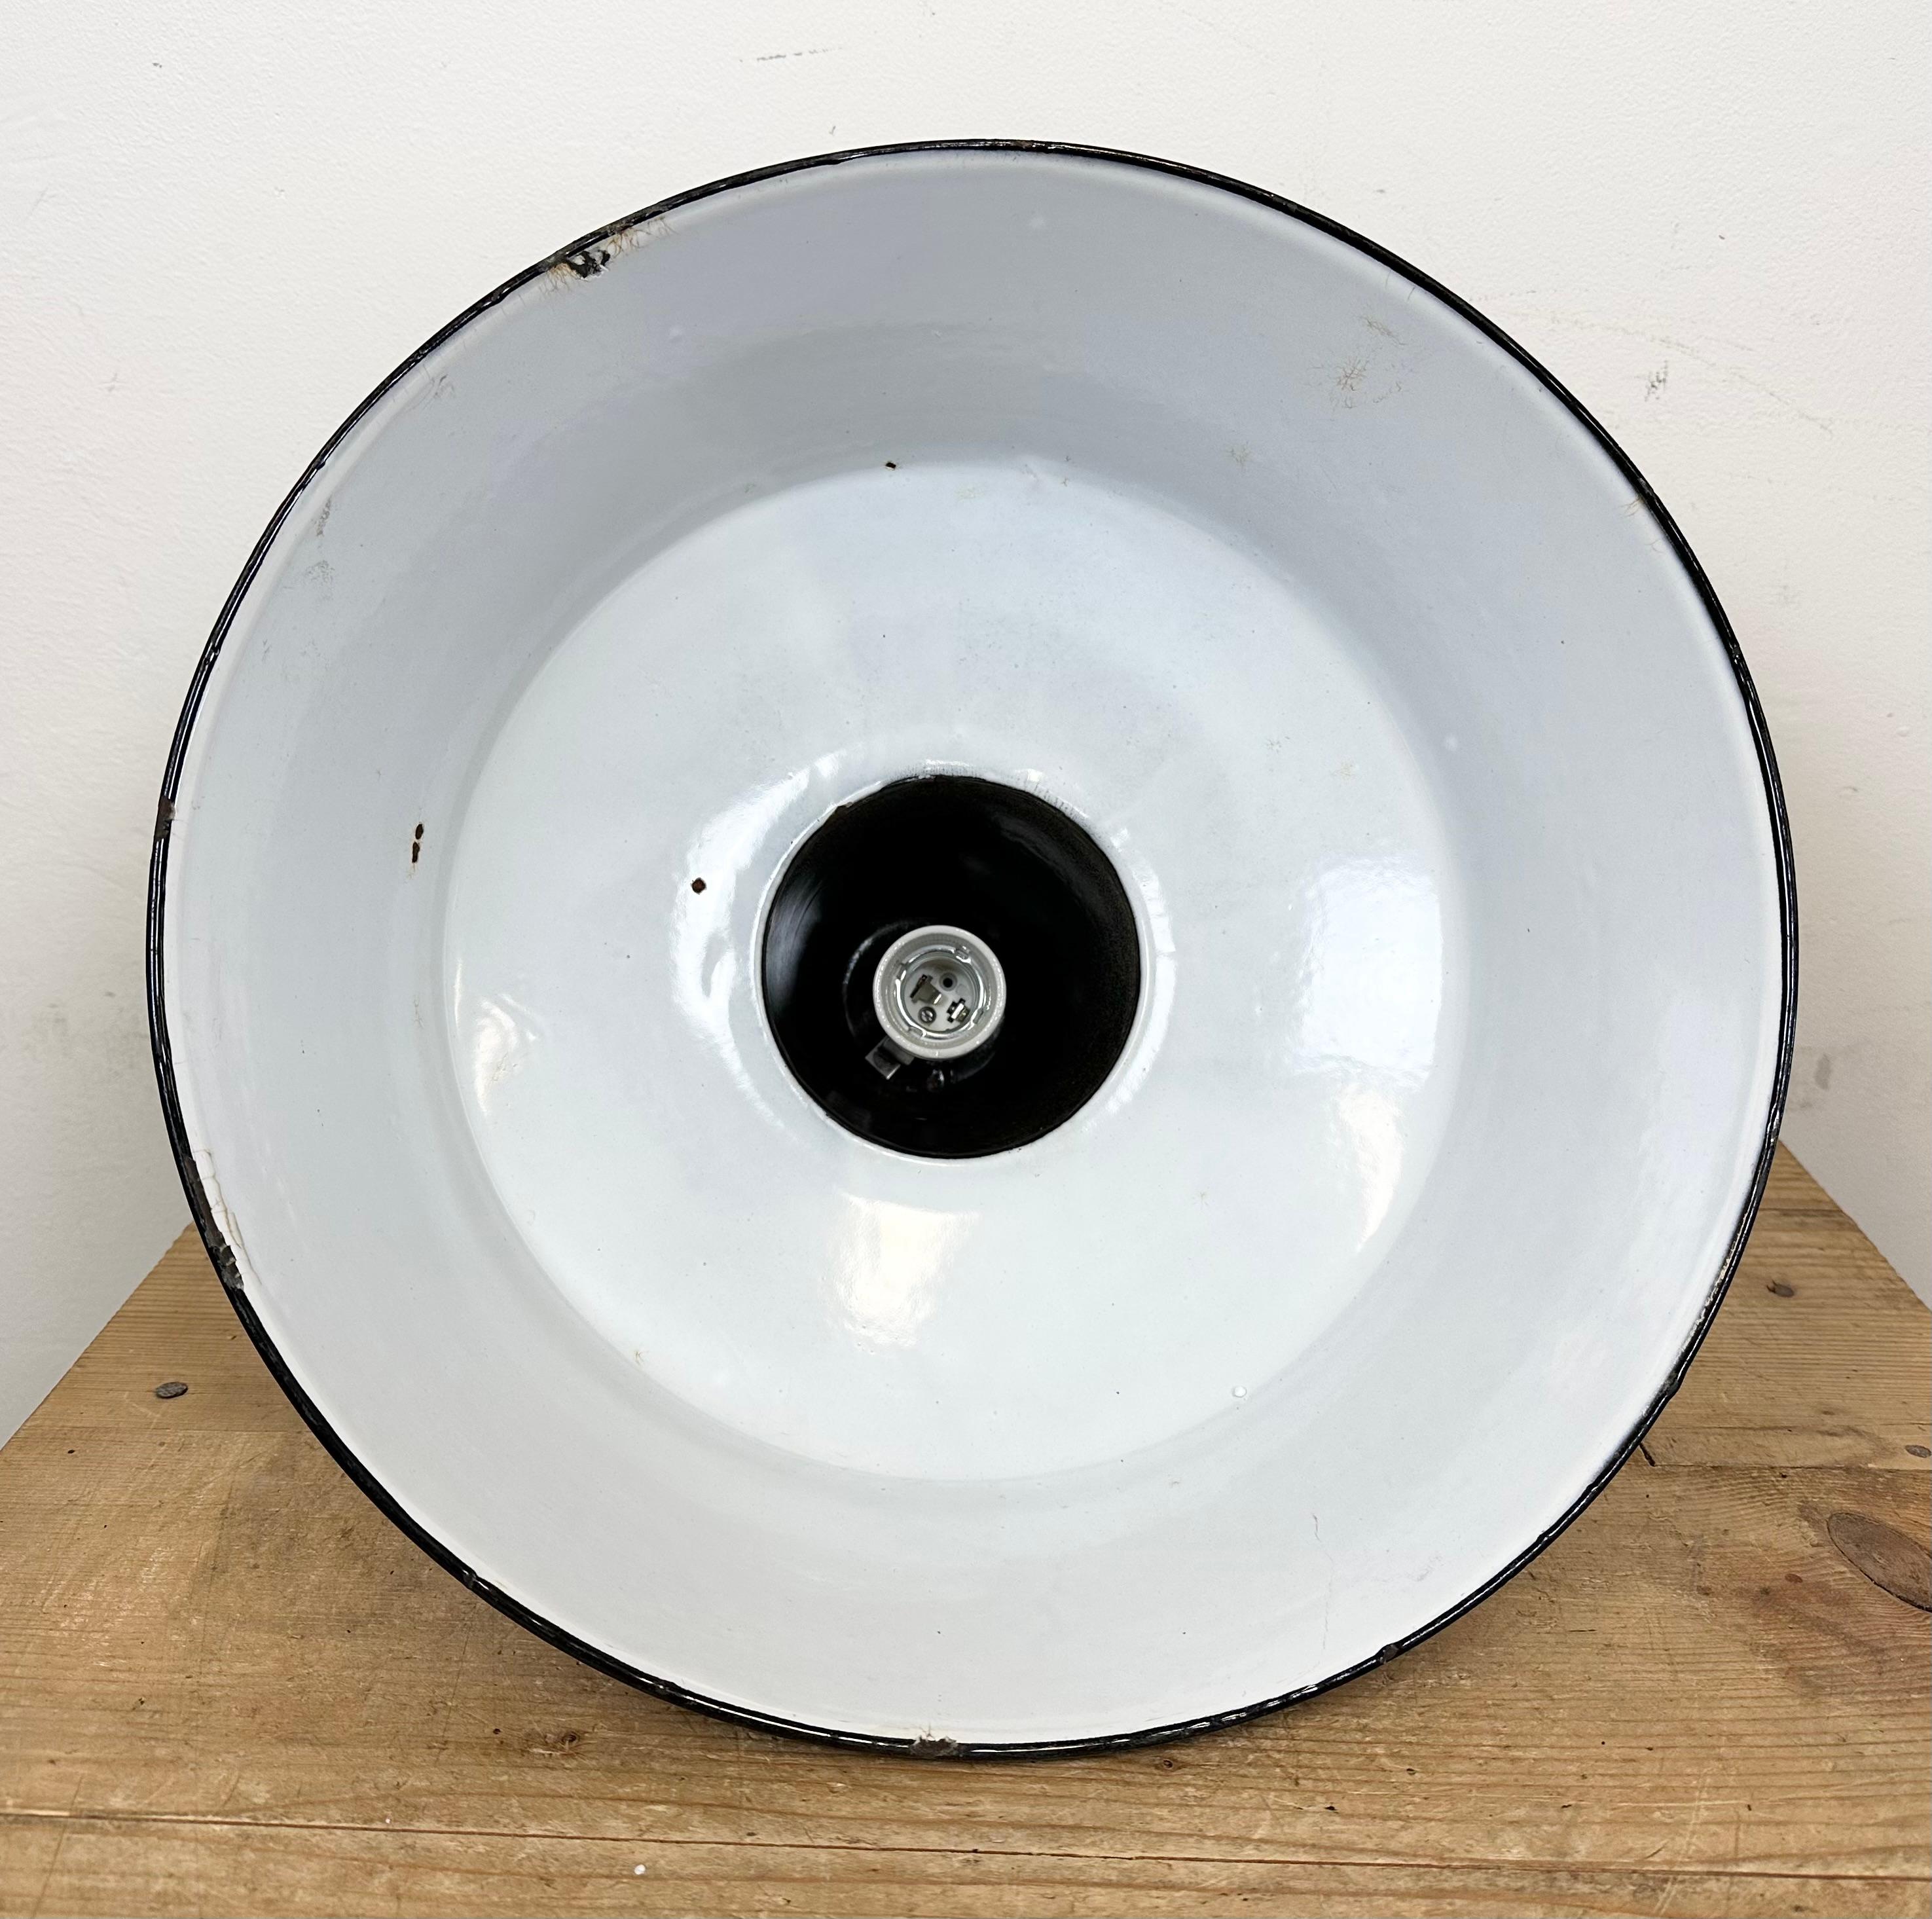 Industrial Black Enamel Factory Lamp with Cast Iron Top, 1950s For Sale 12